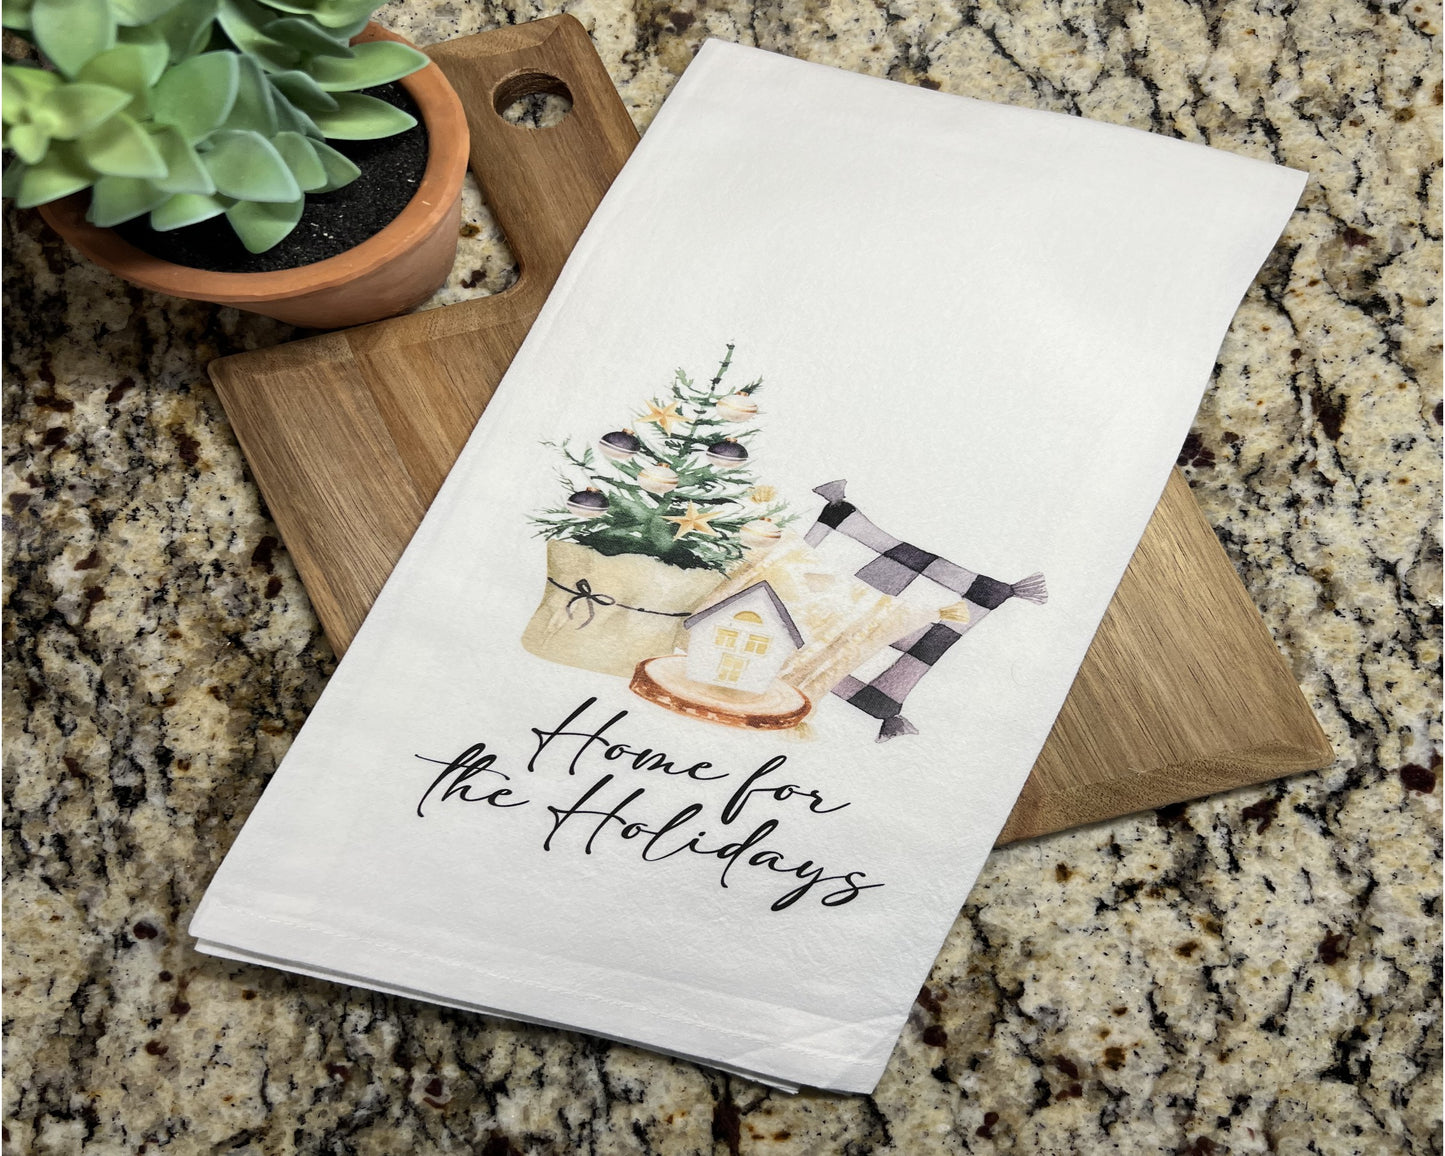 Home For The Holidays Tea Towel, Kitchen Gifts, Kitchen Decor, Home Decor, Christmas Tea Towels